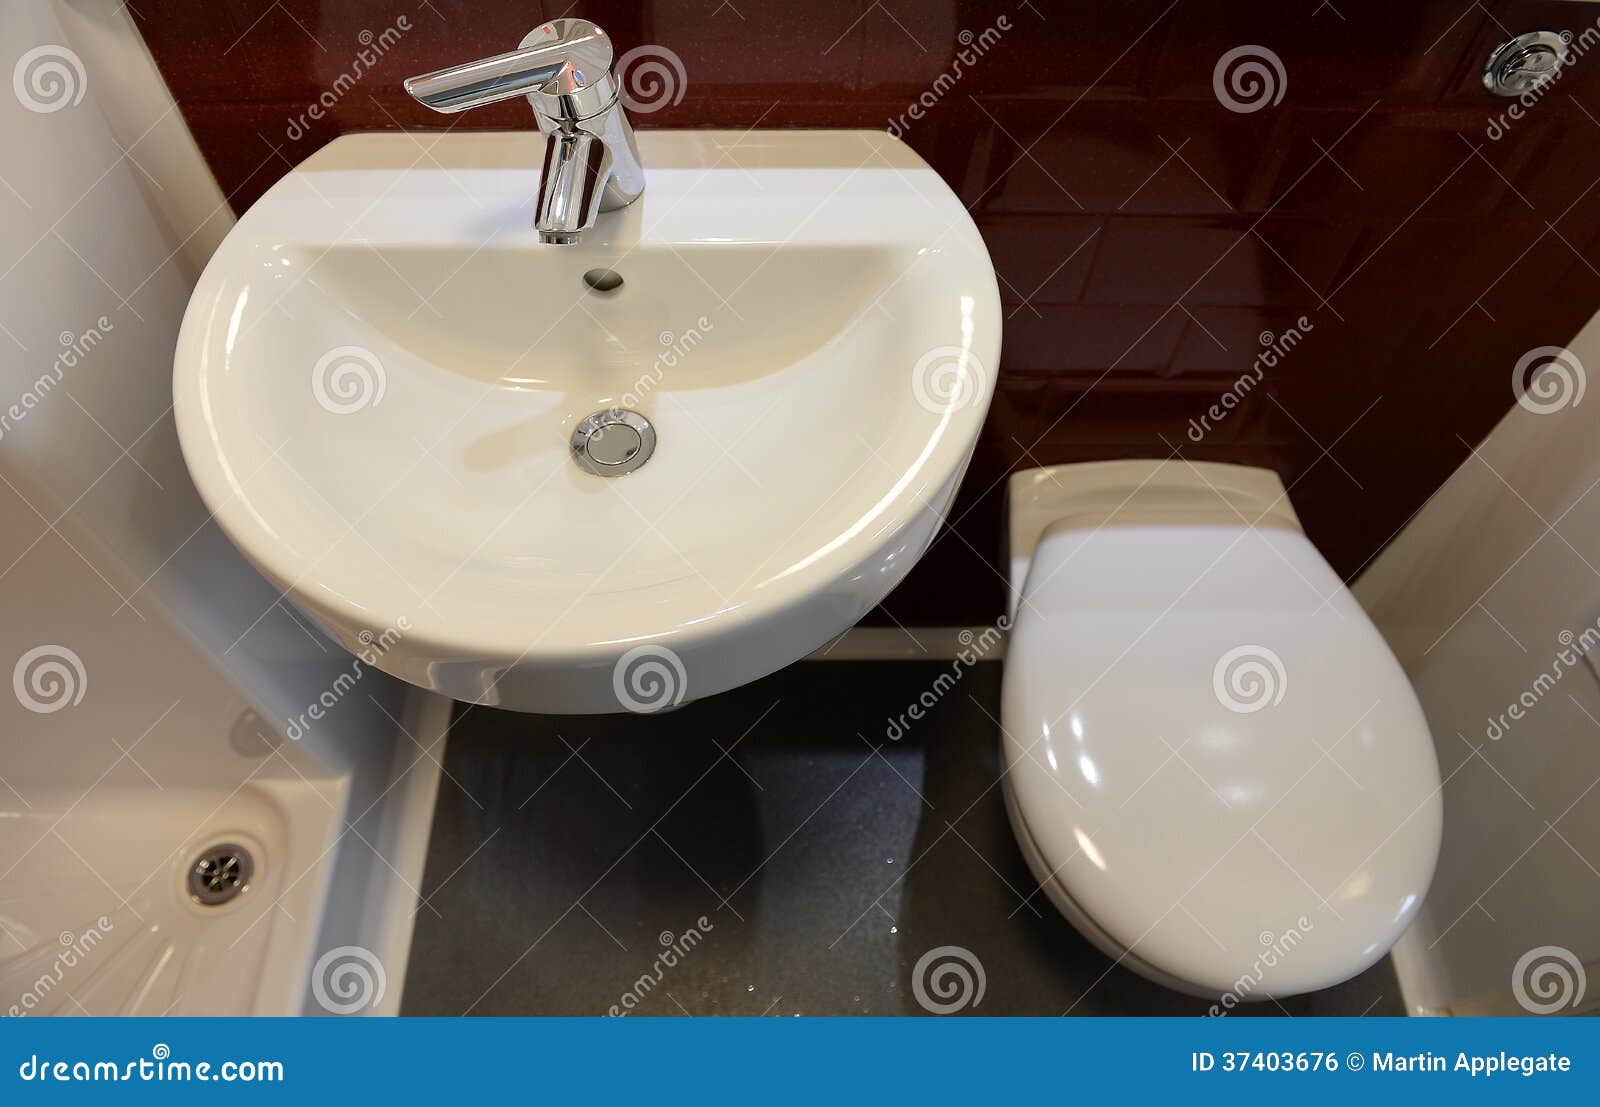 Sink And Toilet In Hotel Stock Photo Image Of Hand Cubicle